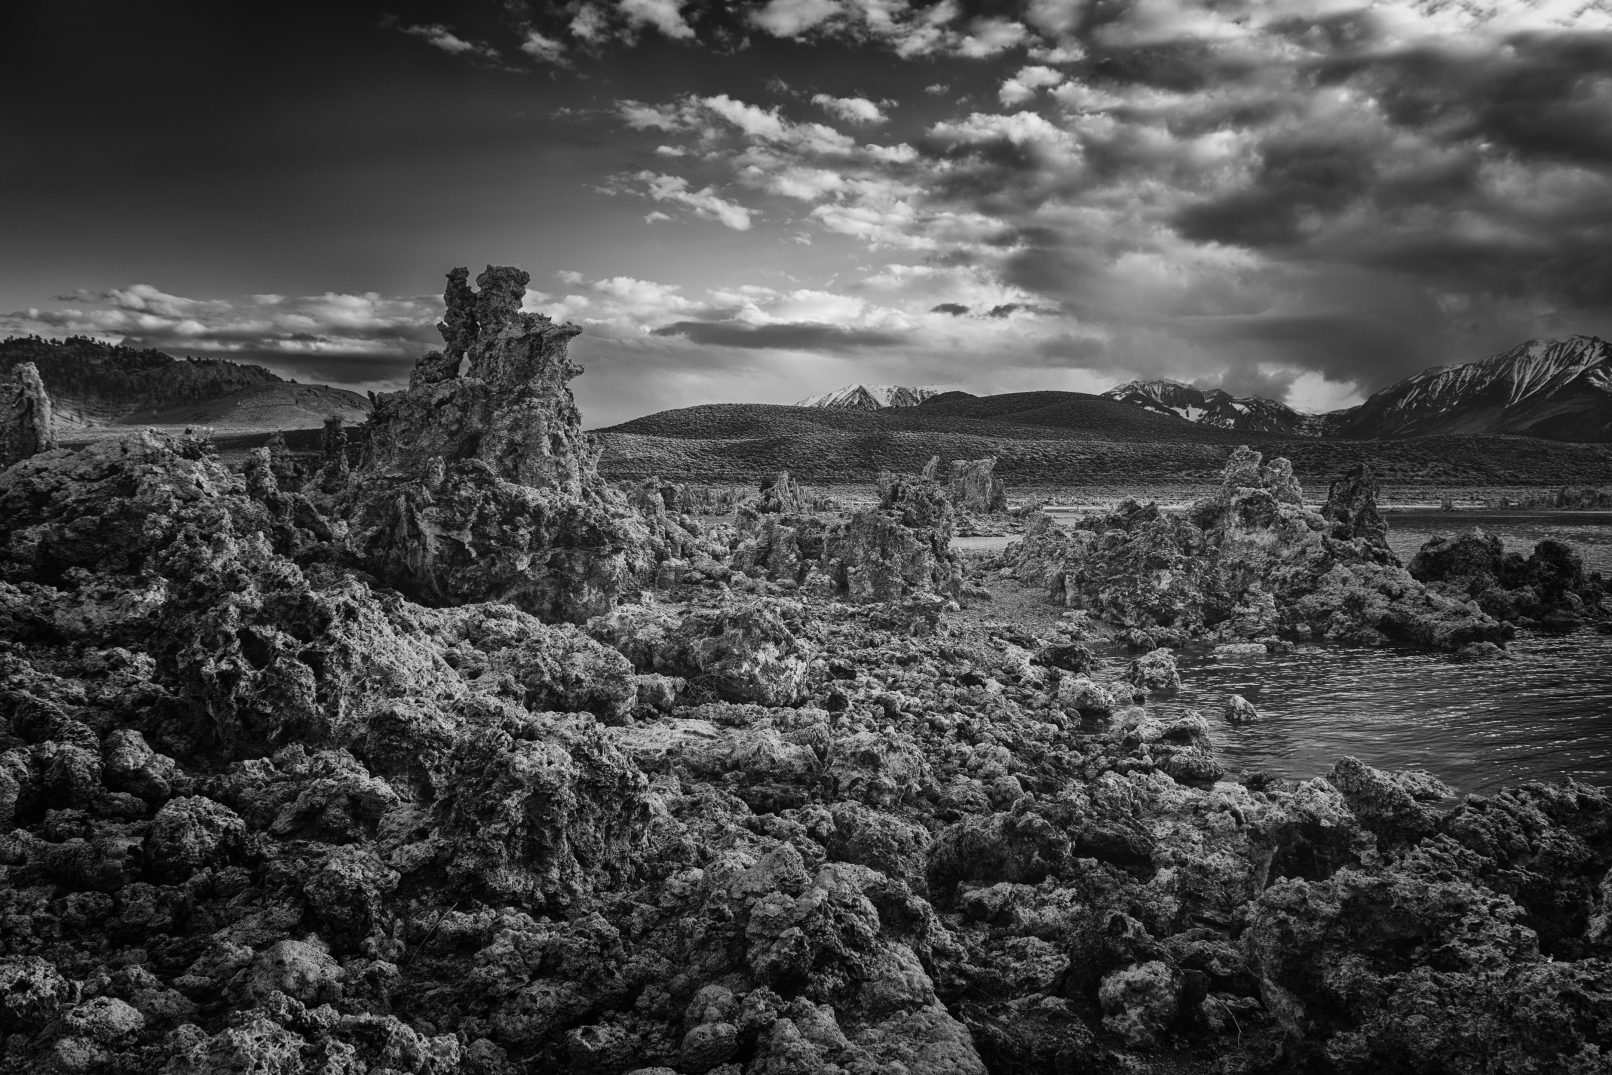 Mono Lake, California with rocks, mountains, and streaked clouds